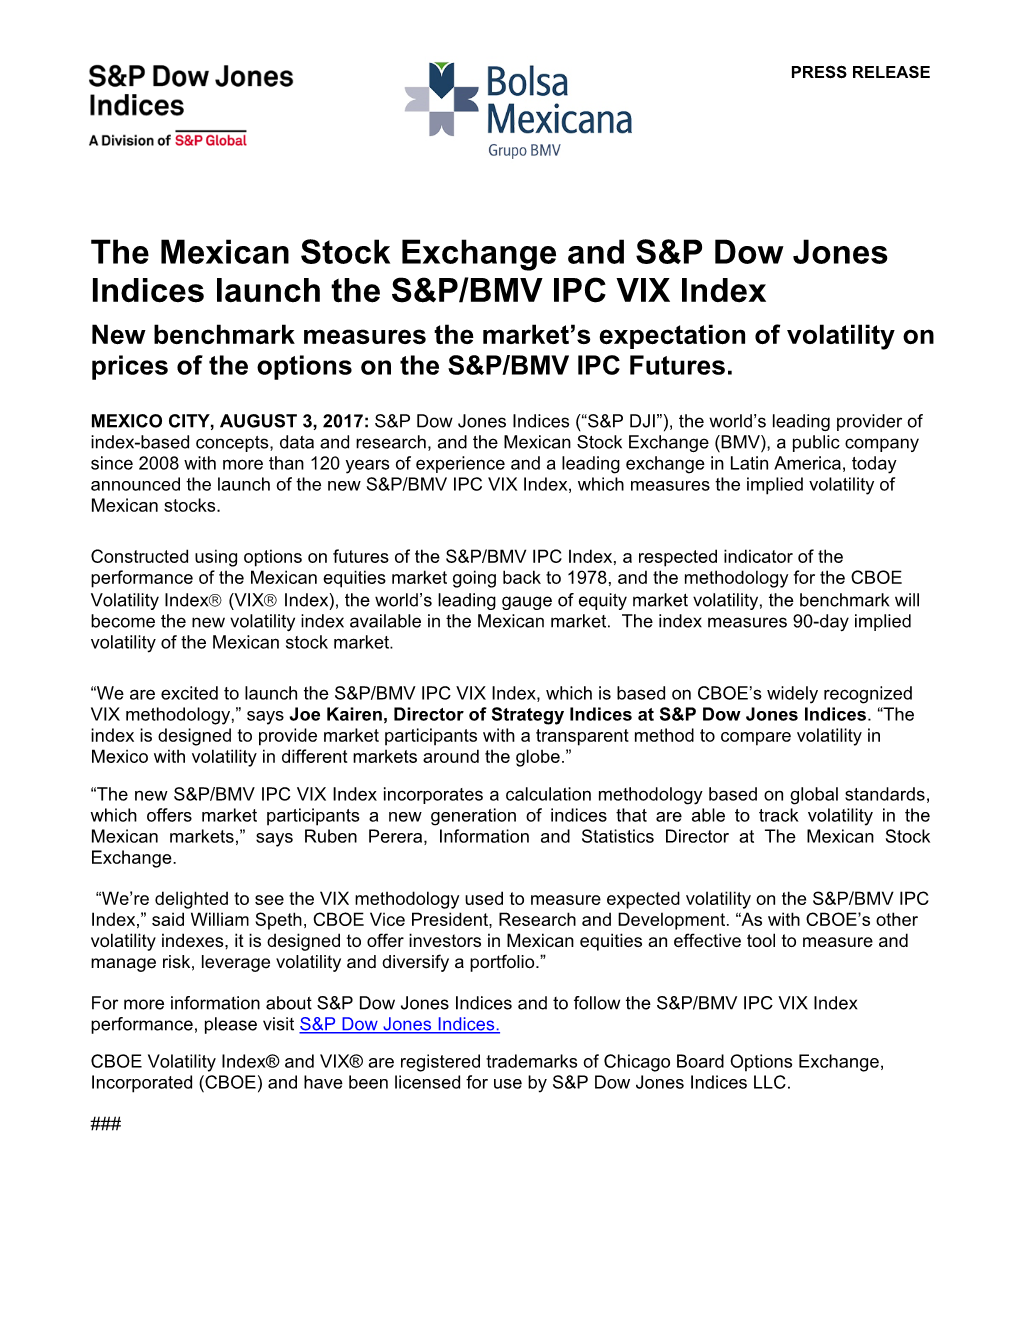 The Mexican Stock Exchange and S&P Dow Jones Indices Launch The